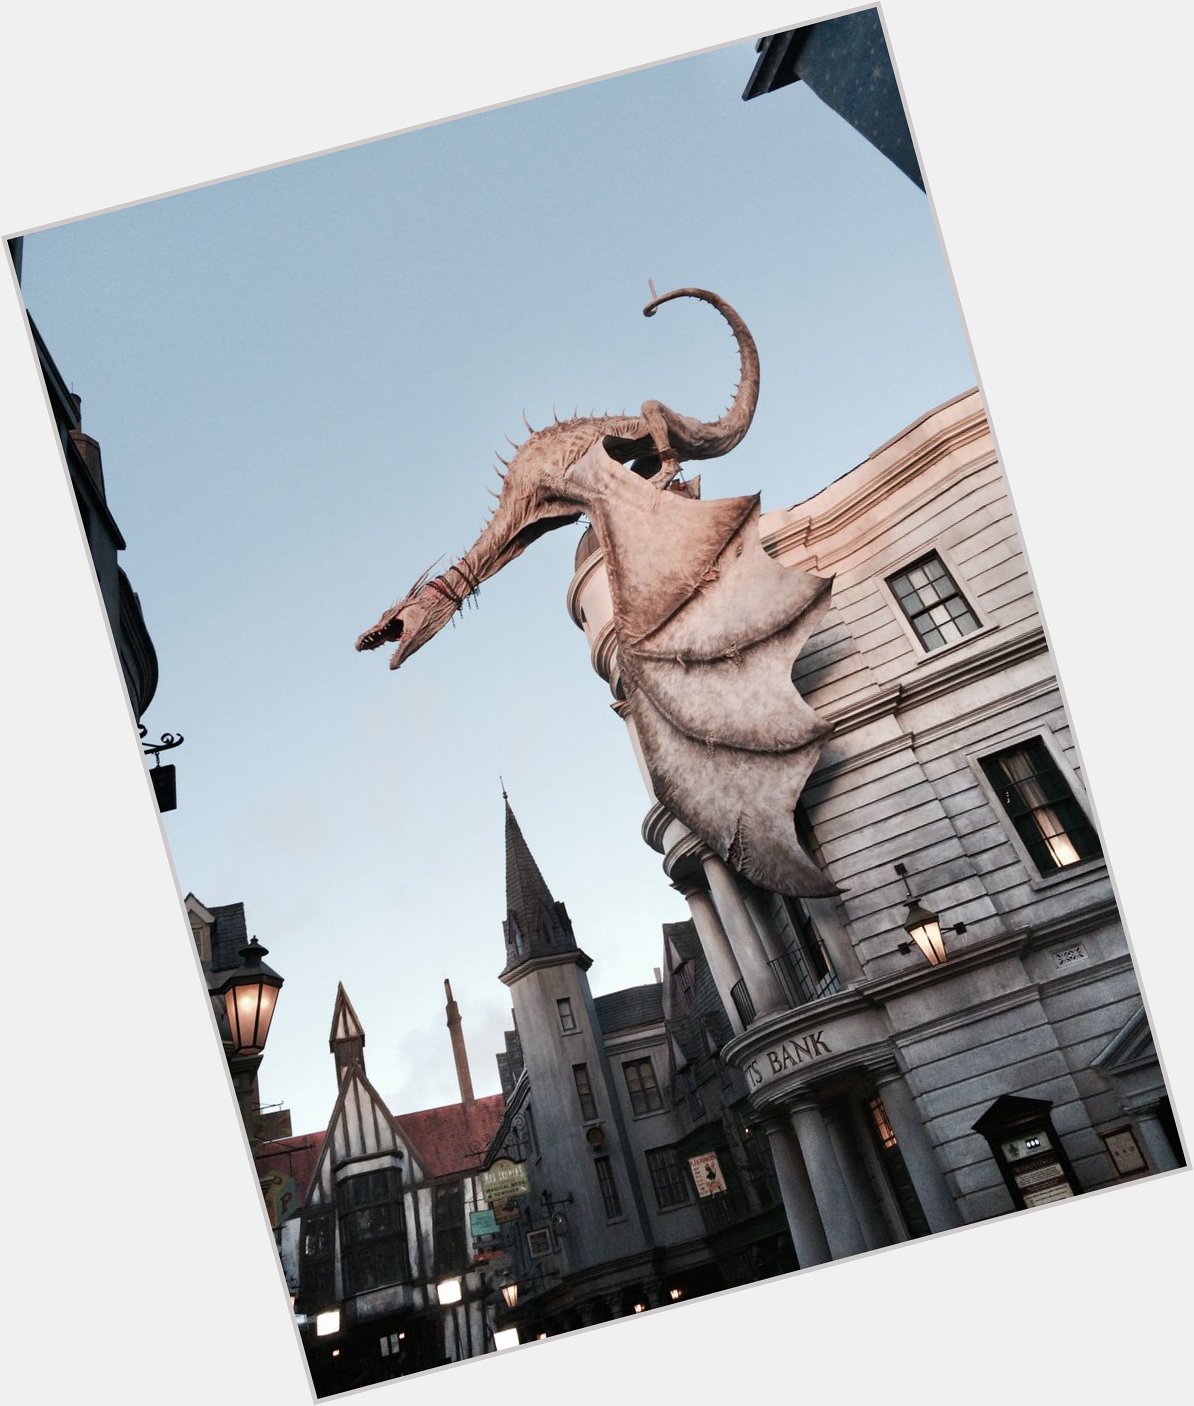 Happy 7th birthday to The Wizarding World of Harry Potter Diagon Alley! 